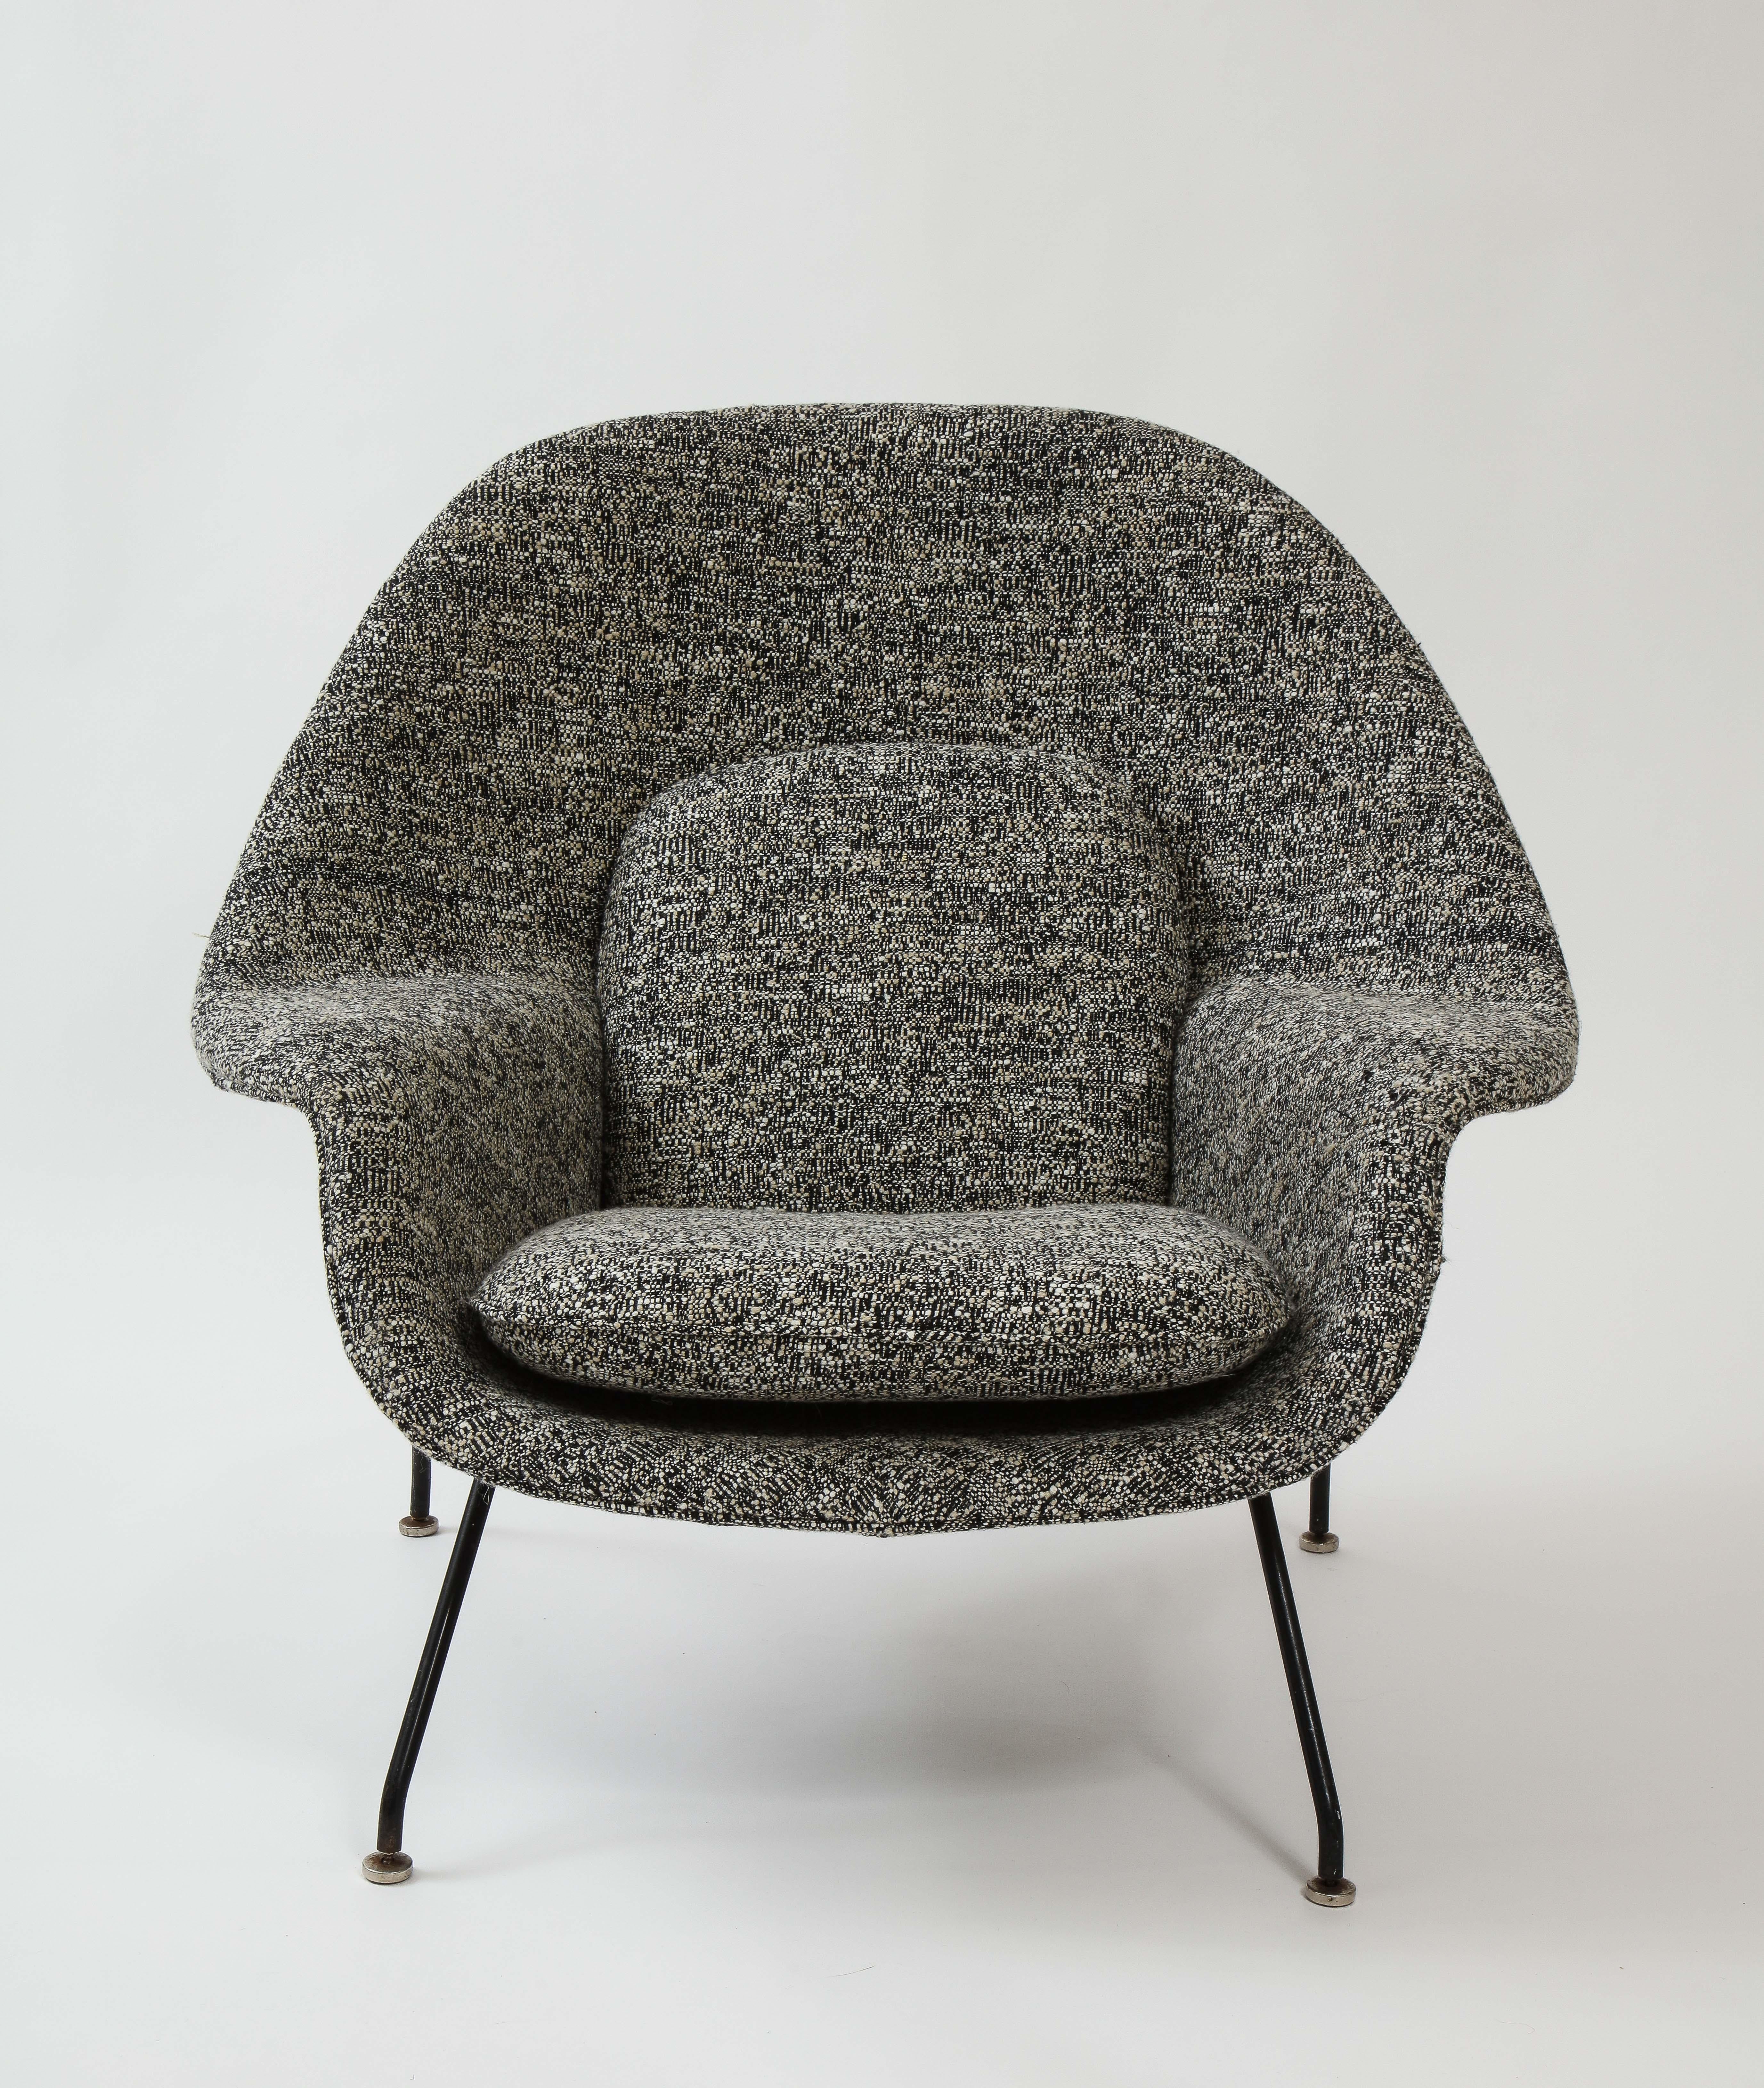 Early womb chair and ottoman, Eero Saarinen
Newly upholstered in black, beige brown soft wool. Both masculine and feminine. A timeless Classic chair.
  